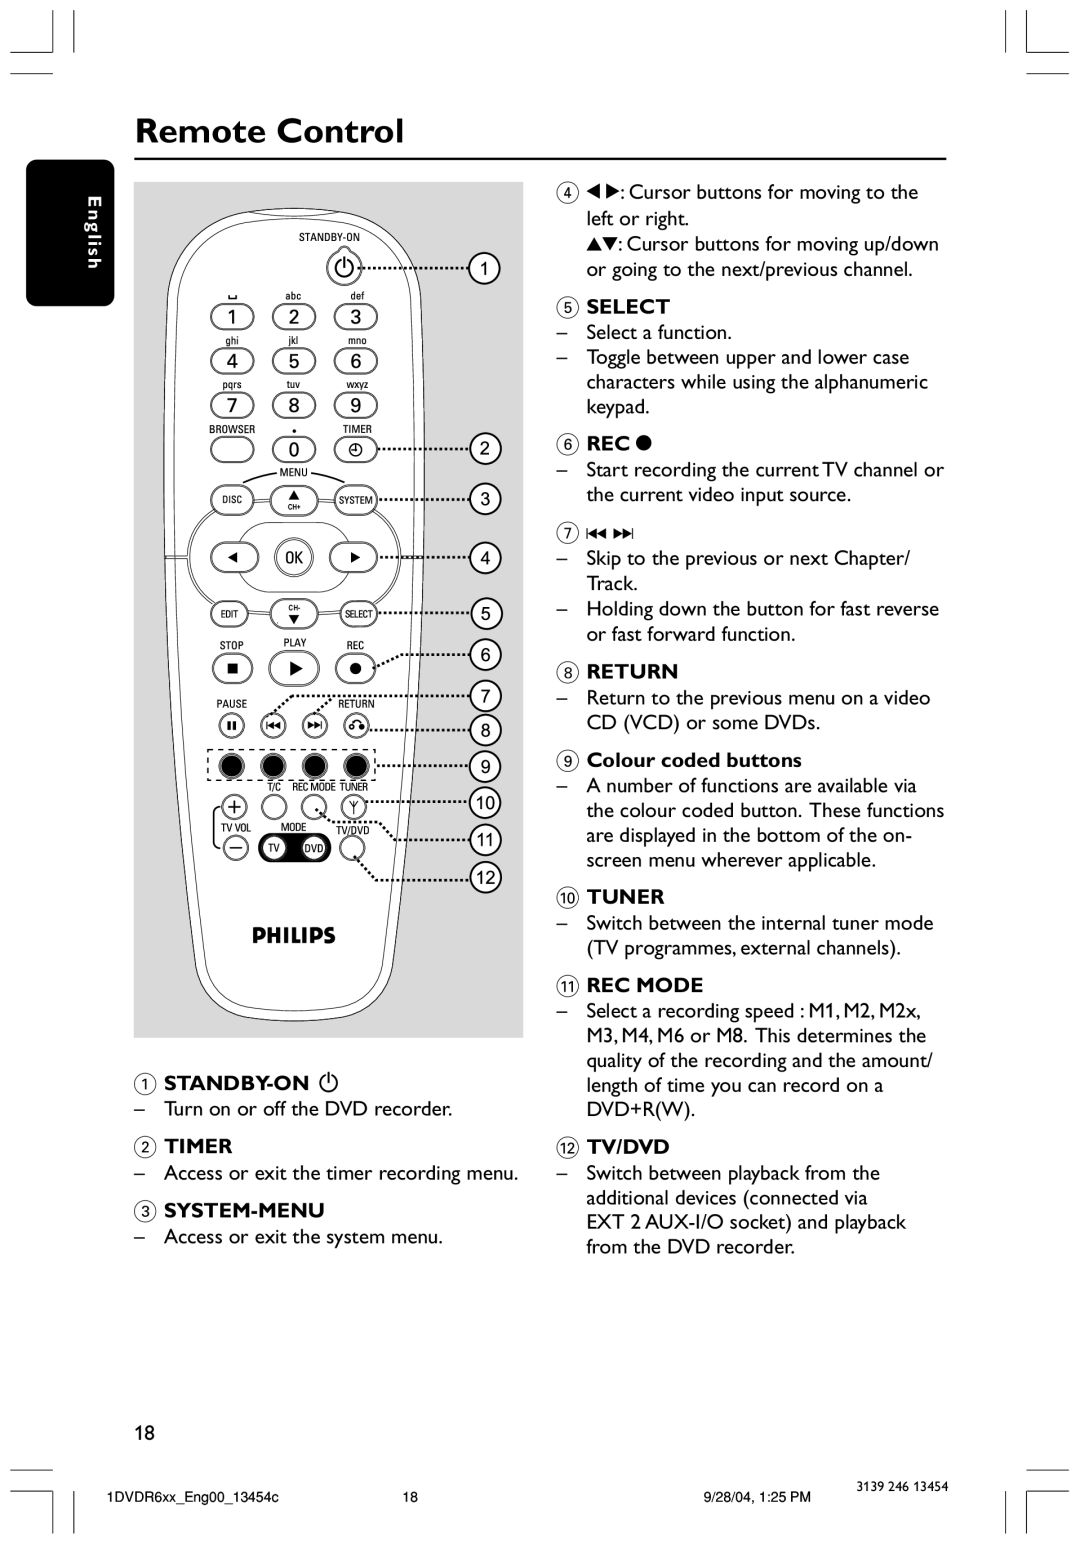 Philips DVDR612/97 Remote Control, Standby-On, Timer, System-Menu, Select, 6 REC, Return, Colour coded buttons, Tuner 